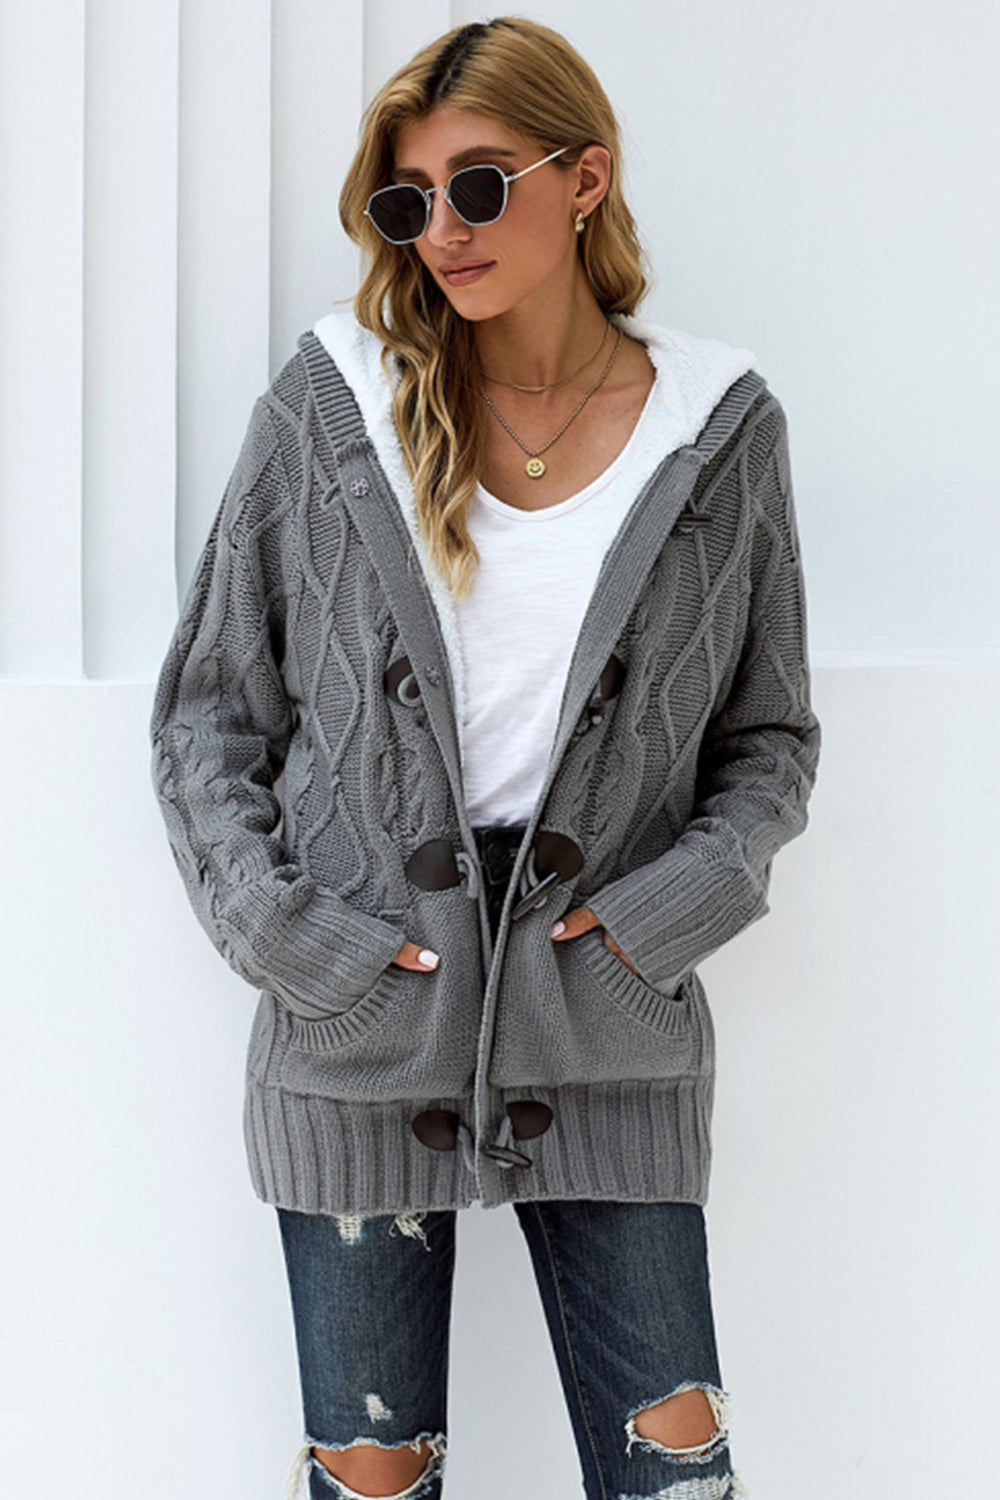 Womens Front Button Hooded Pocket Sweater Outwear Cardigan